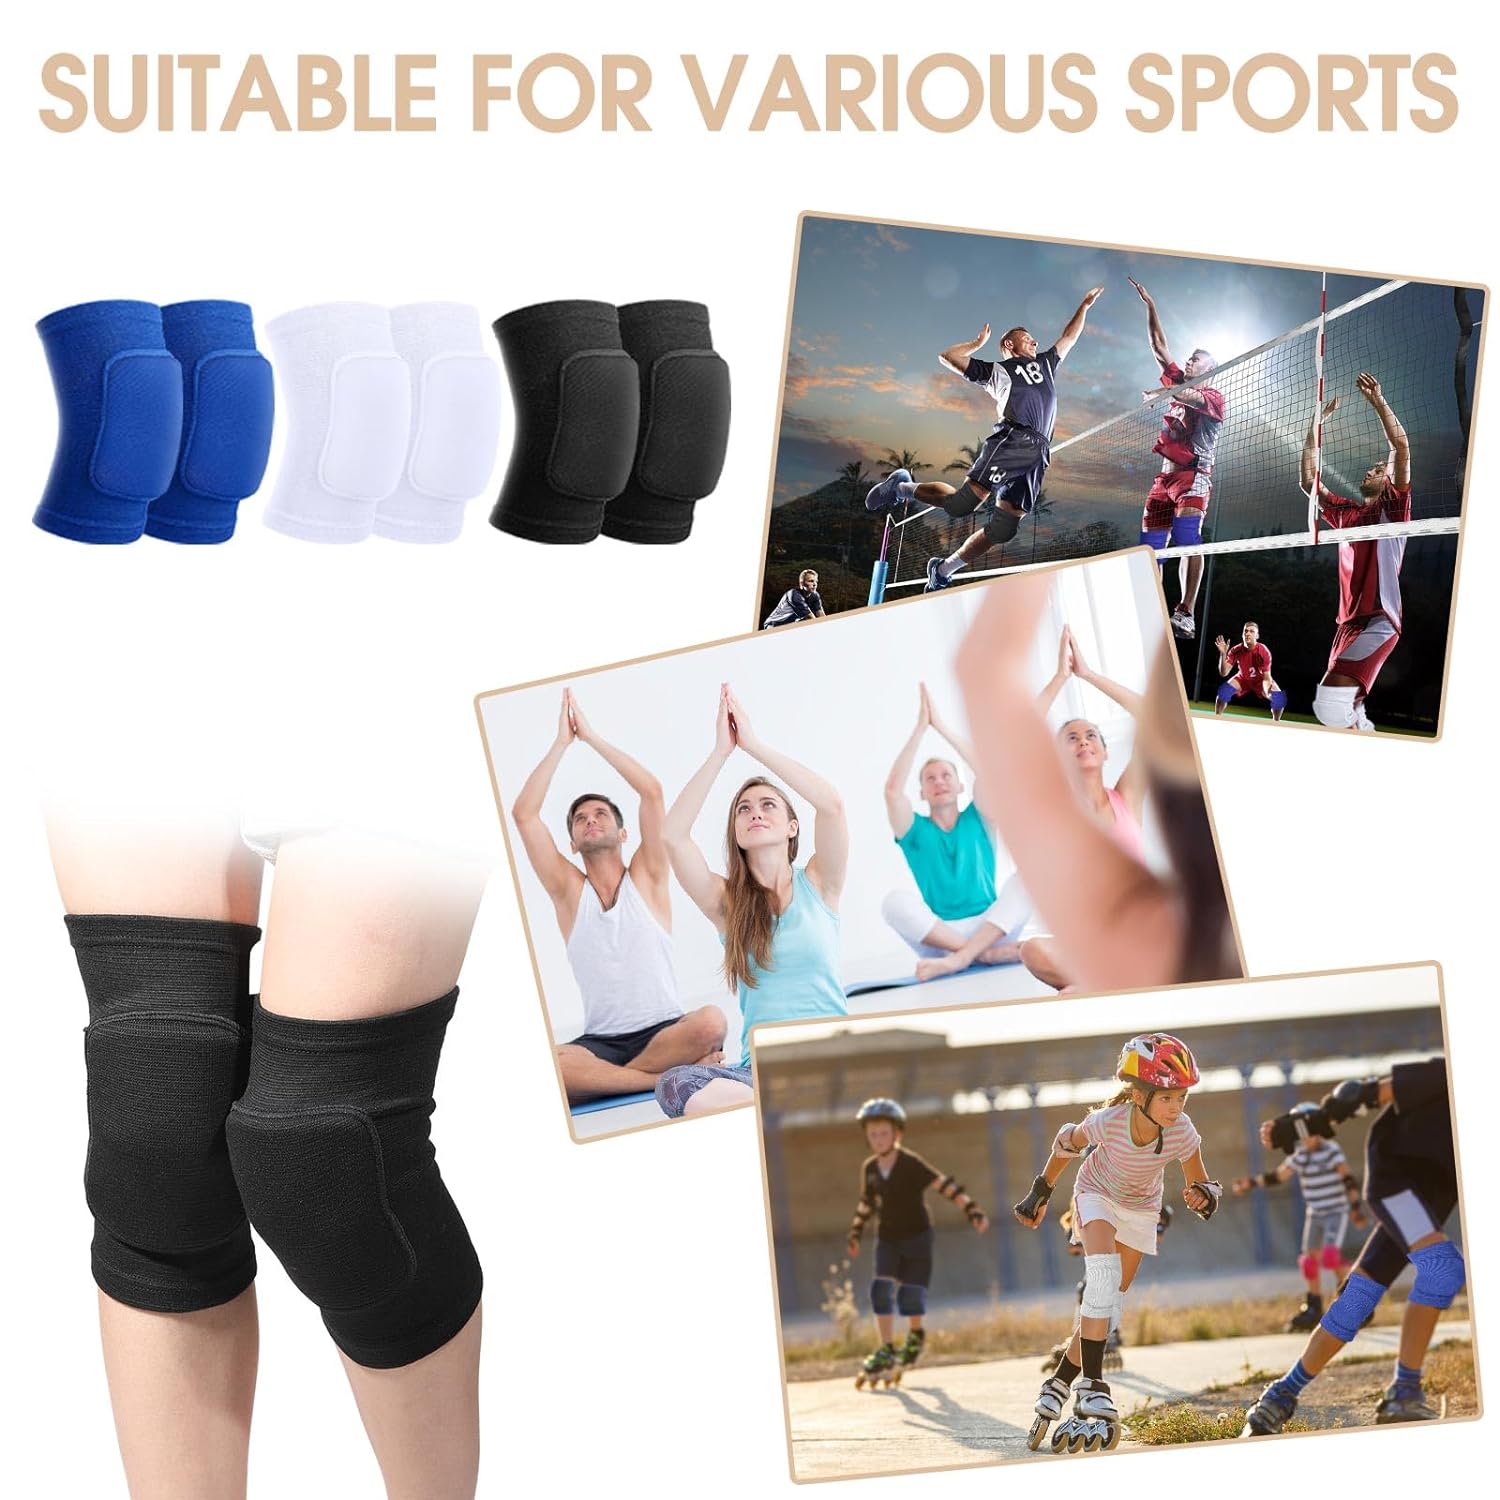 Lenwen 12 Pairs Volleyball Knee Pads for Dancers, Breathable Knee Pads for Men Women Kids, Black Knee Braces for Volleyball Football Soccer Dance Yoga Wrestling Running Cycling (Classic Color,Medium)